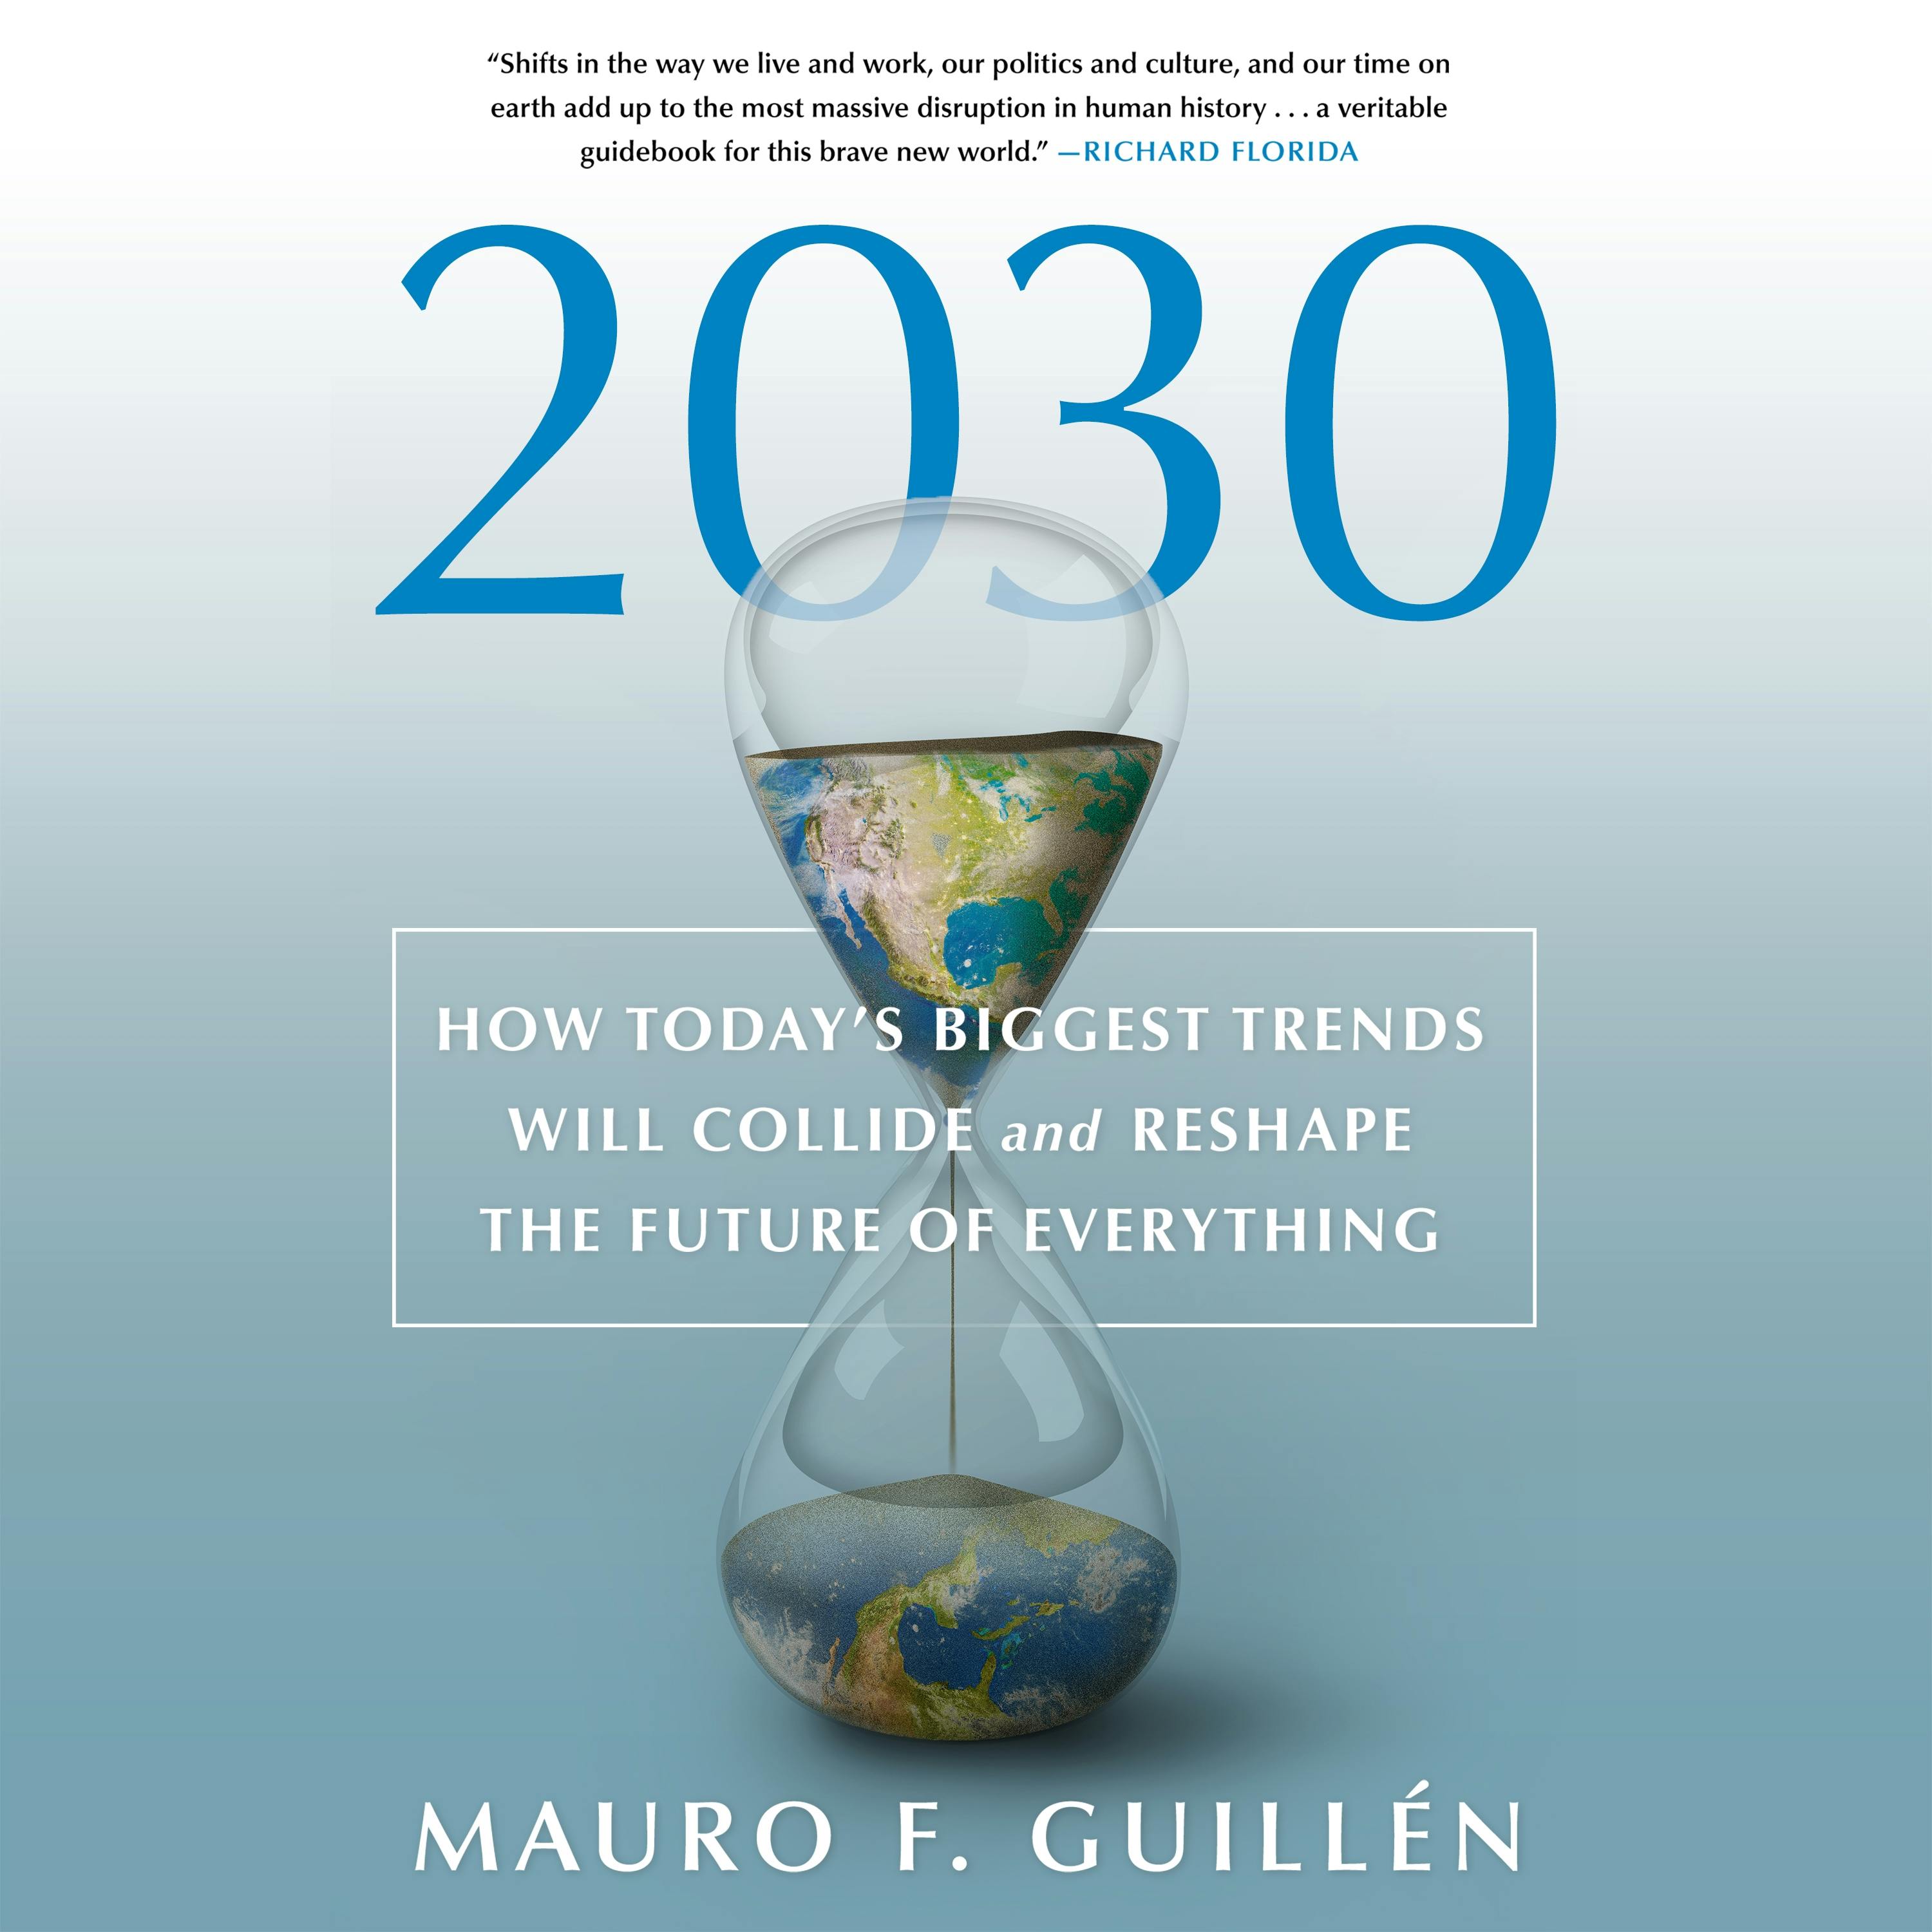 2030-how-today-s-biggest-trends-will-collide-and-reshape-the-future-of